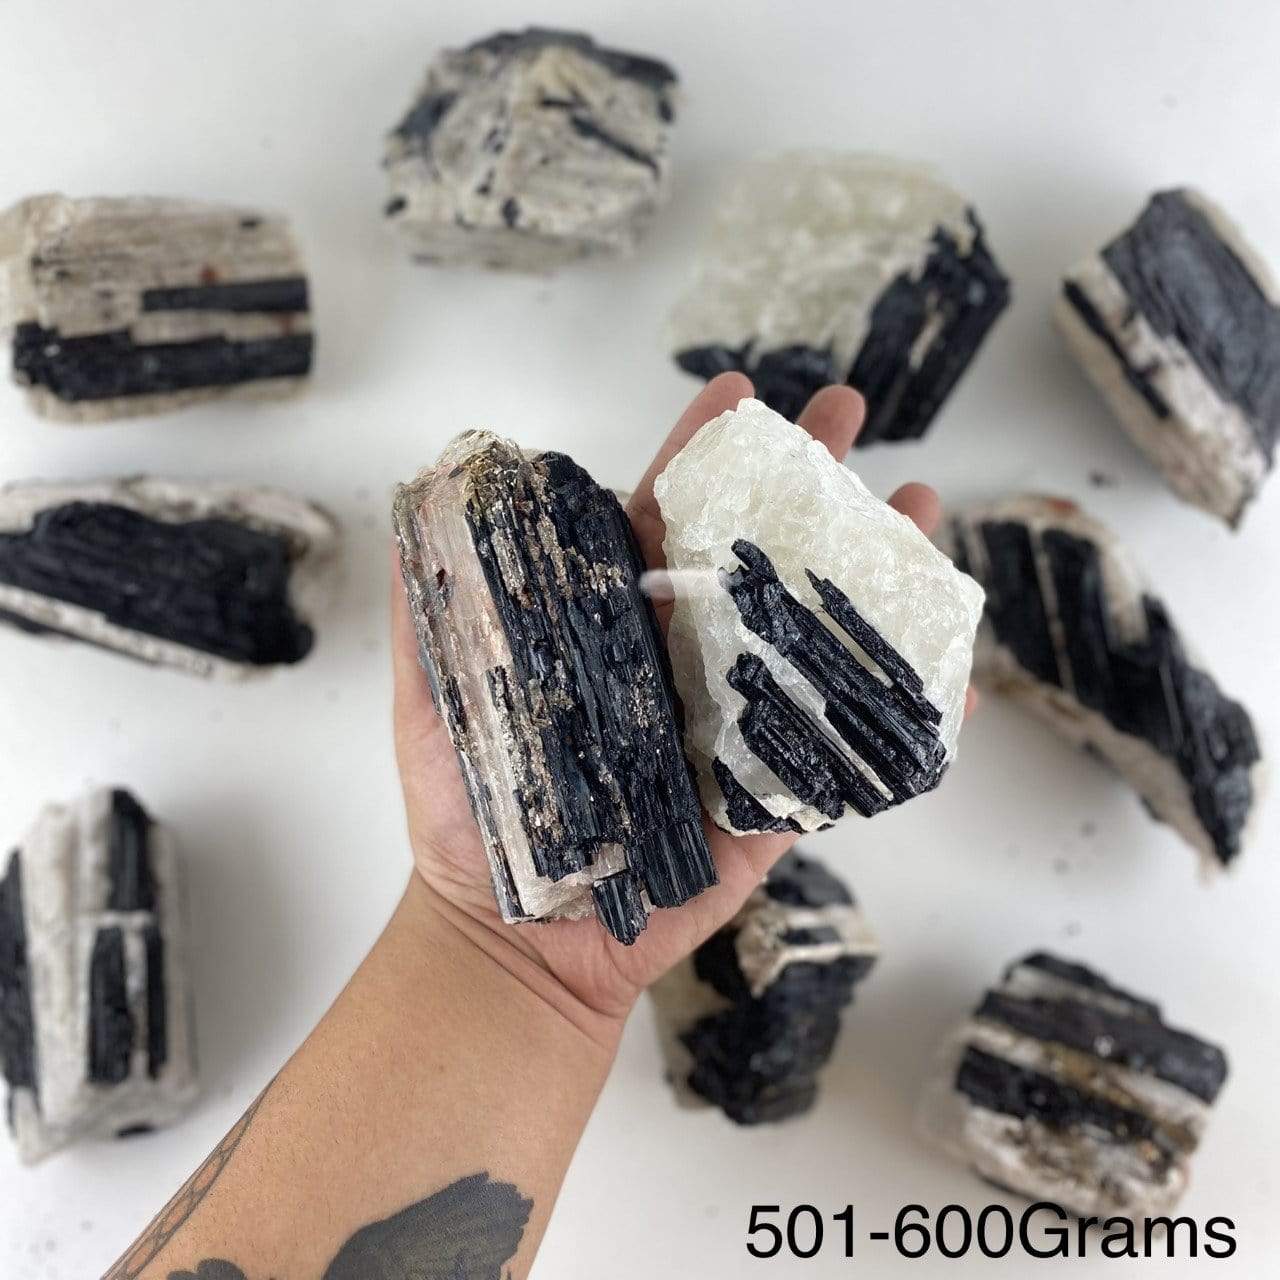 black tourmaline on matrix displayed in hand size is for 501-600 grams